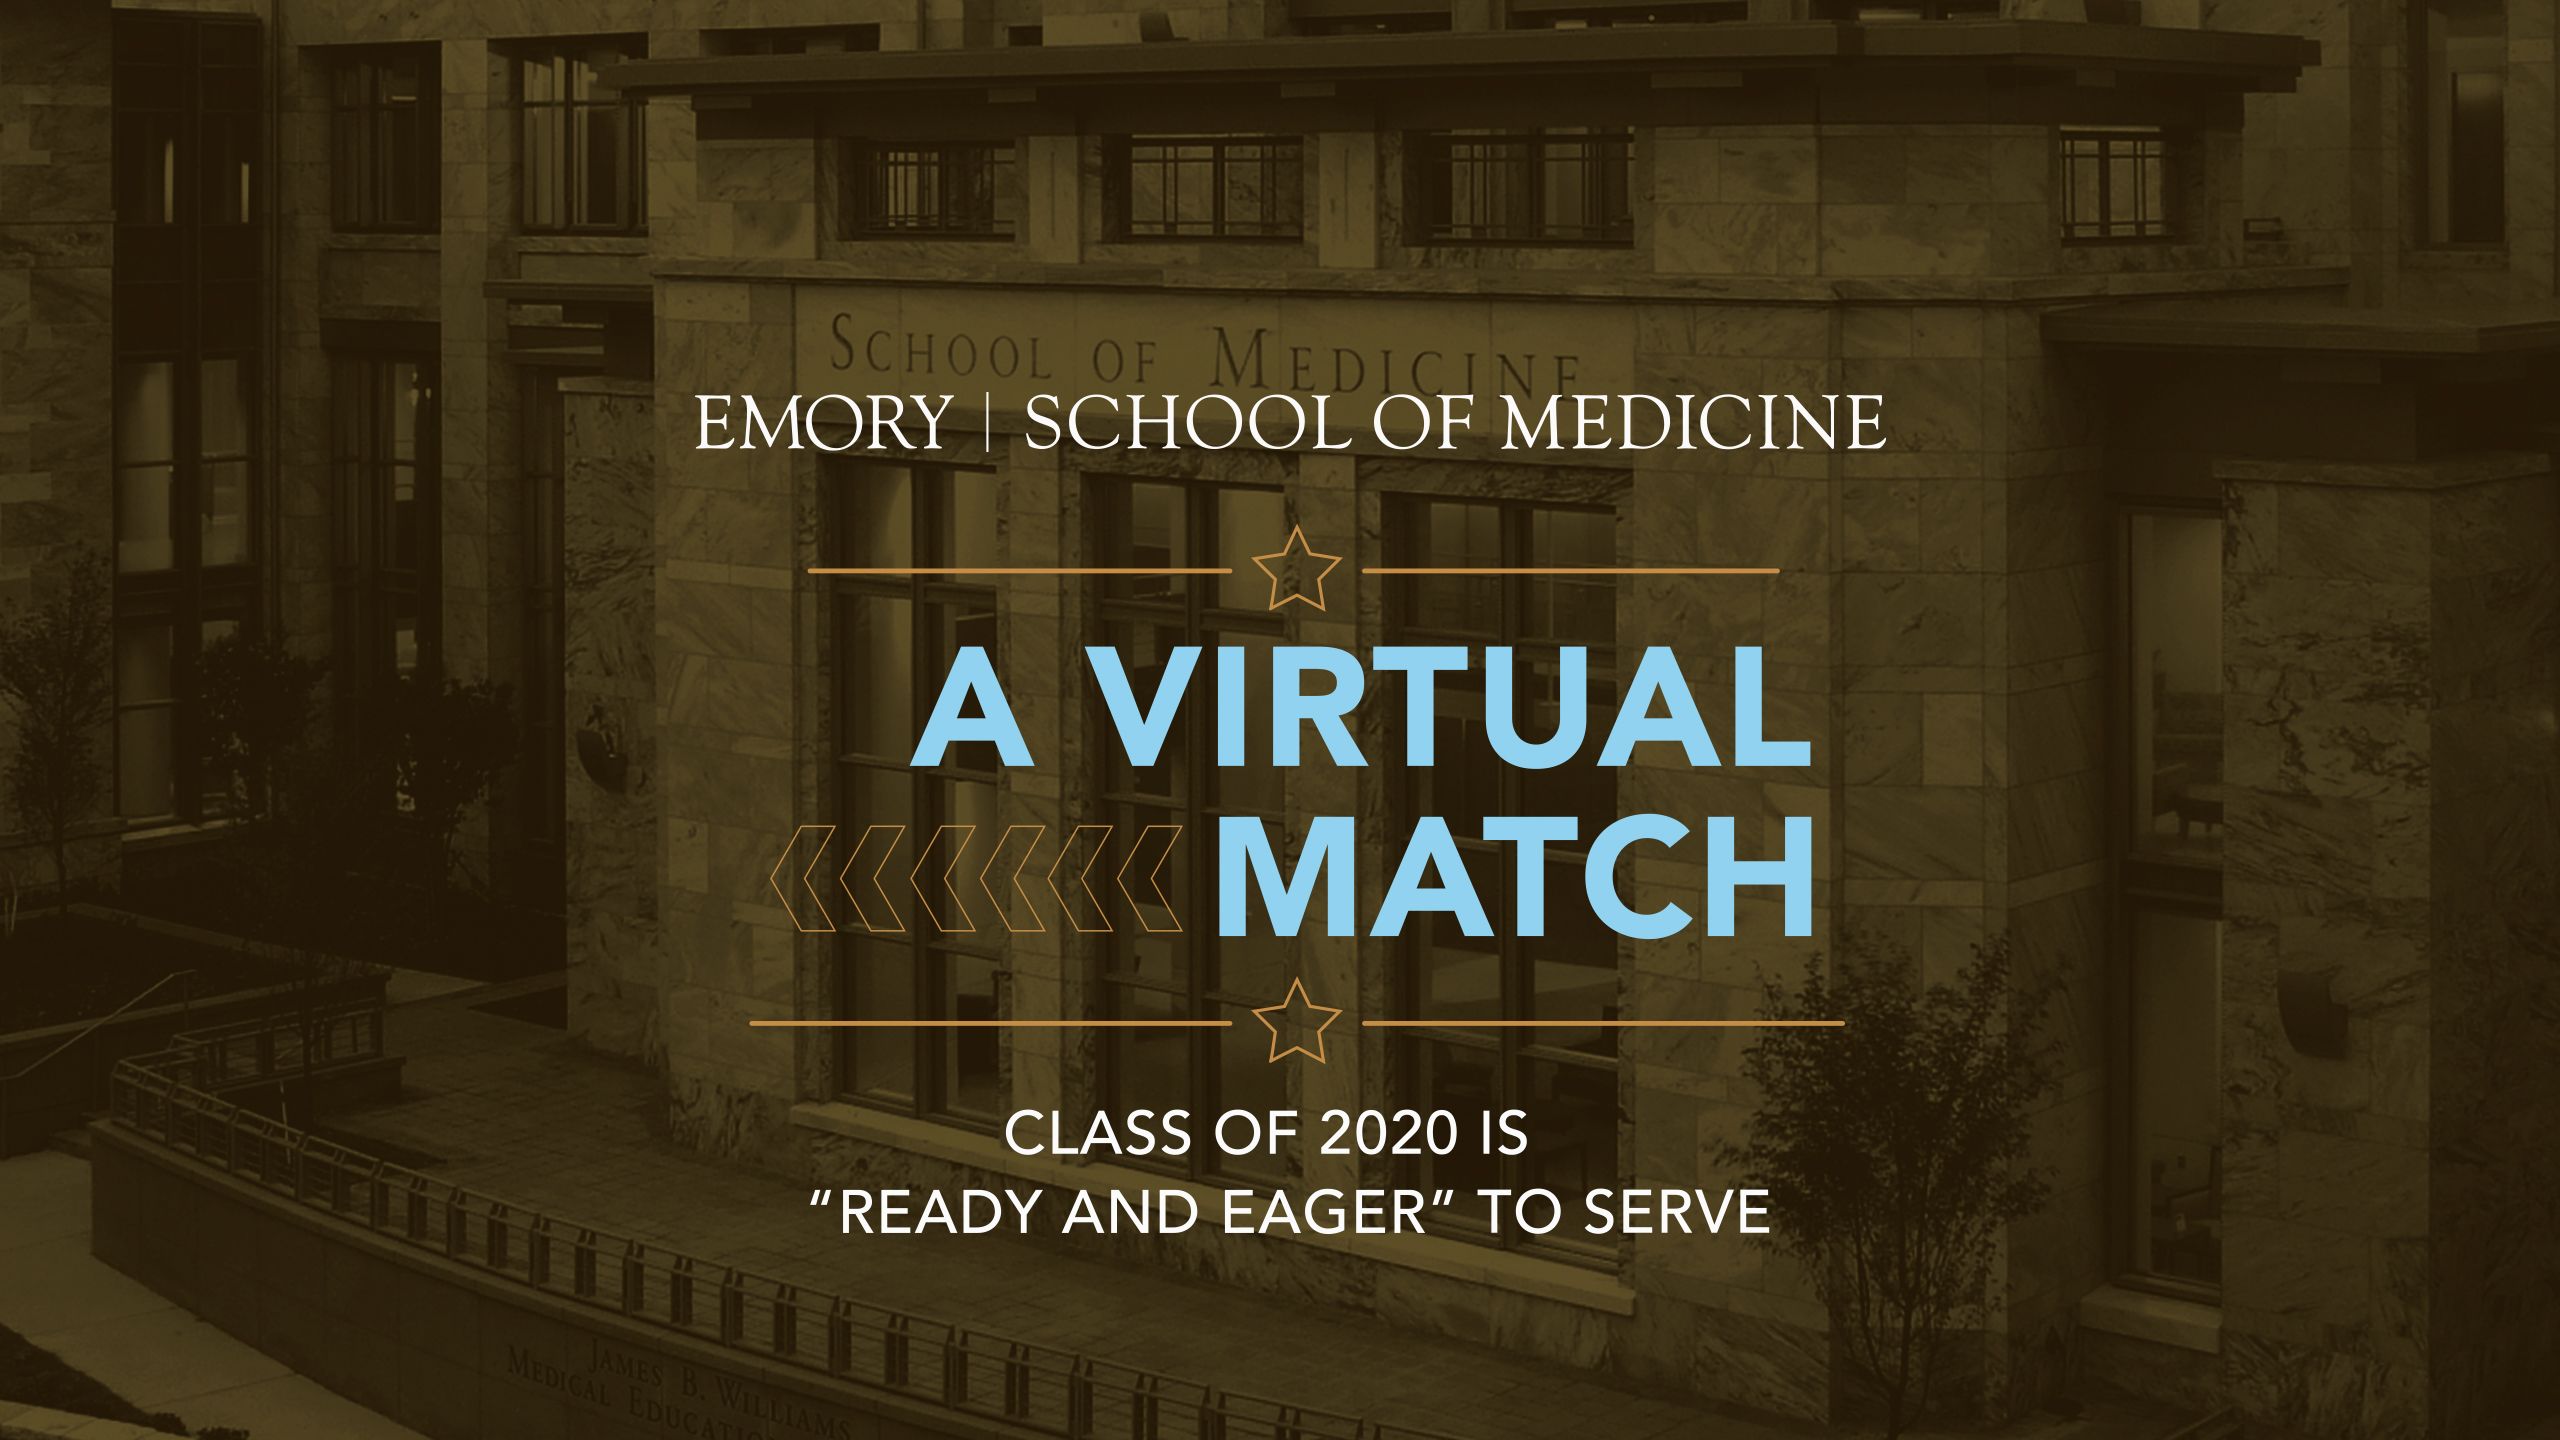 Photo of the Emory School of Medicine with text: A Virtual Match Class of 2020 is "ready and eager" to serve